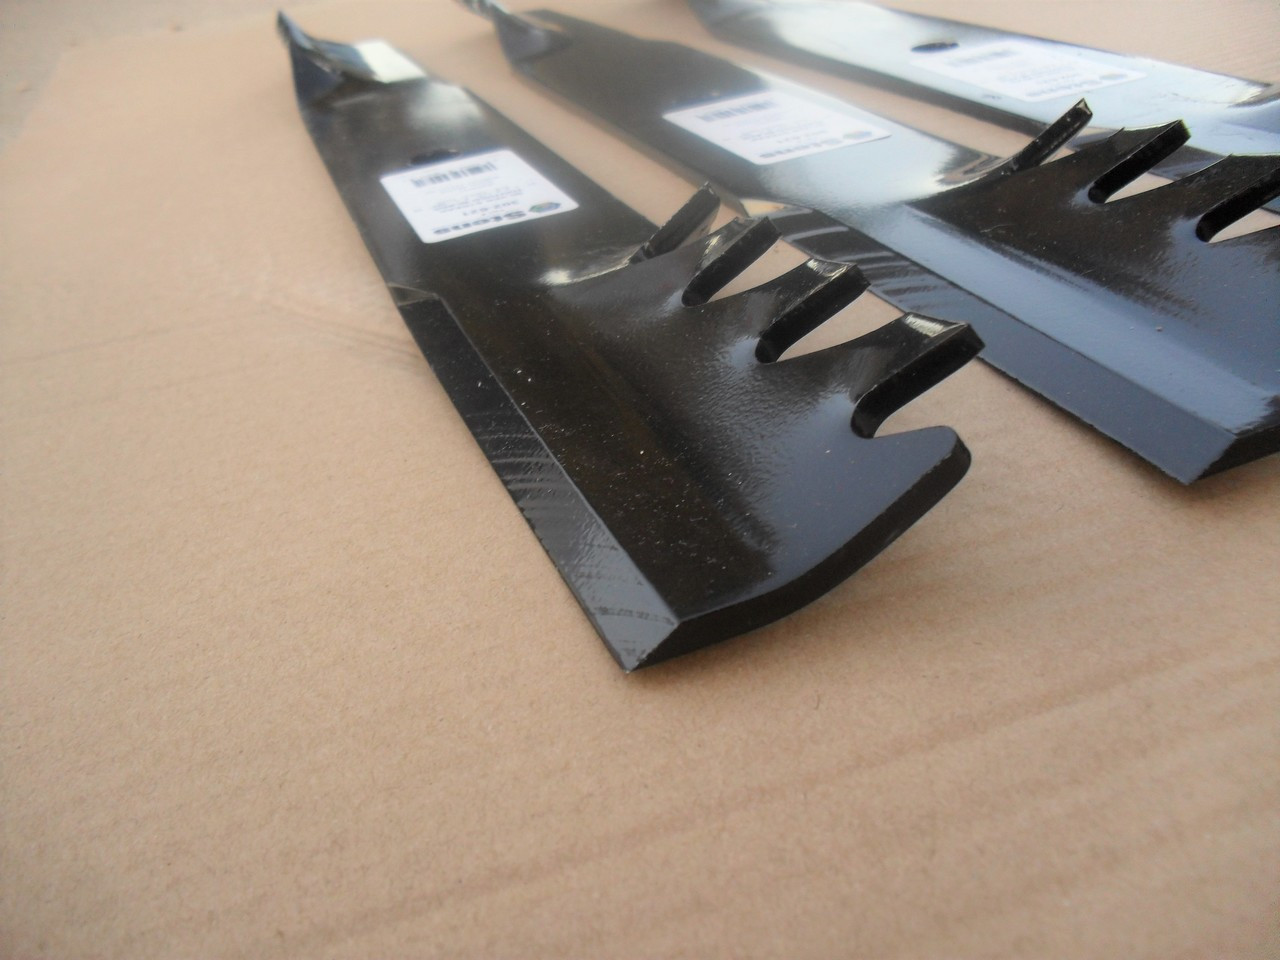 Mulching Toothed Blades for Bunton 61" Cut 79117, PC005, PL4207, 79-117 mulcher tooth